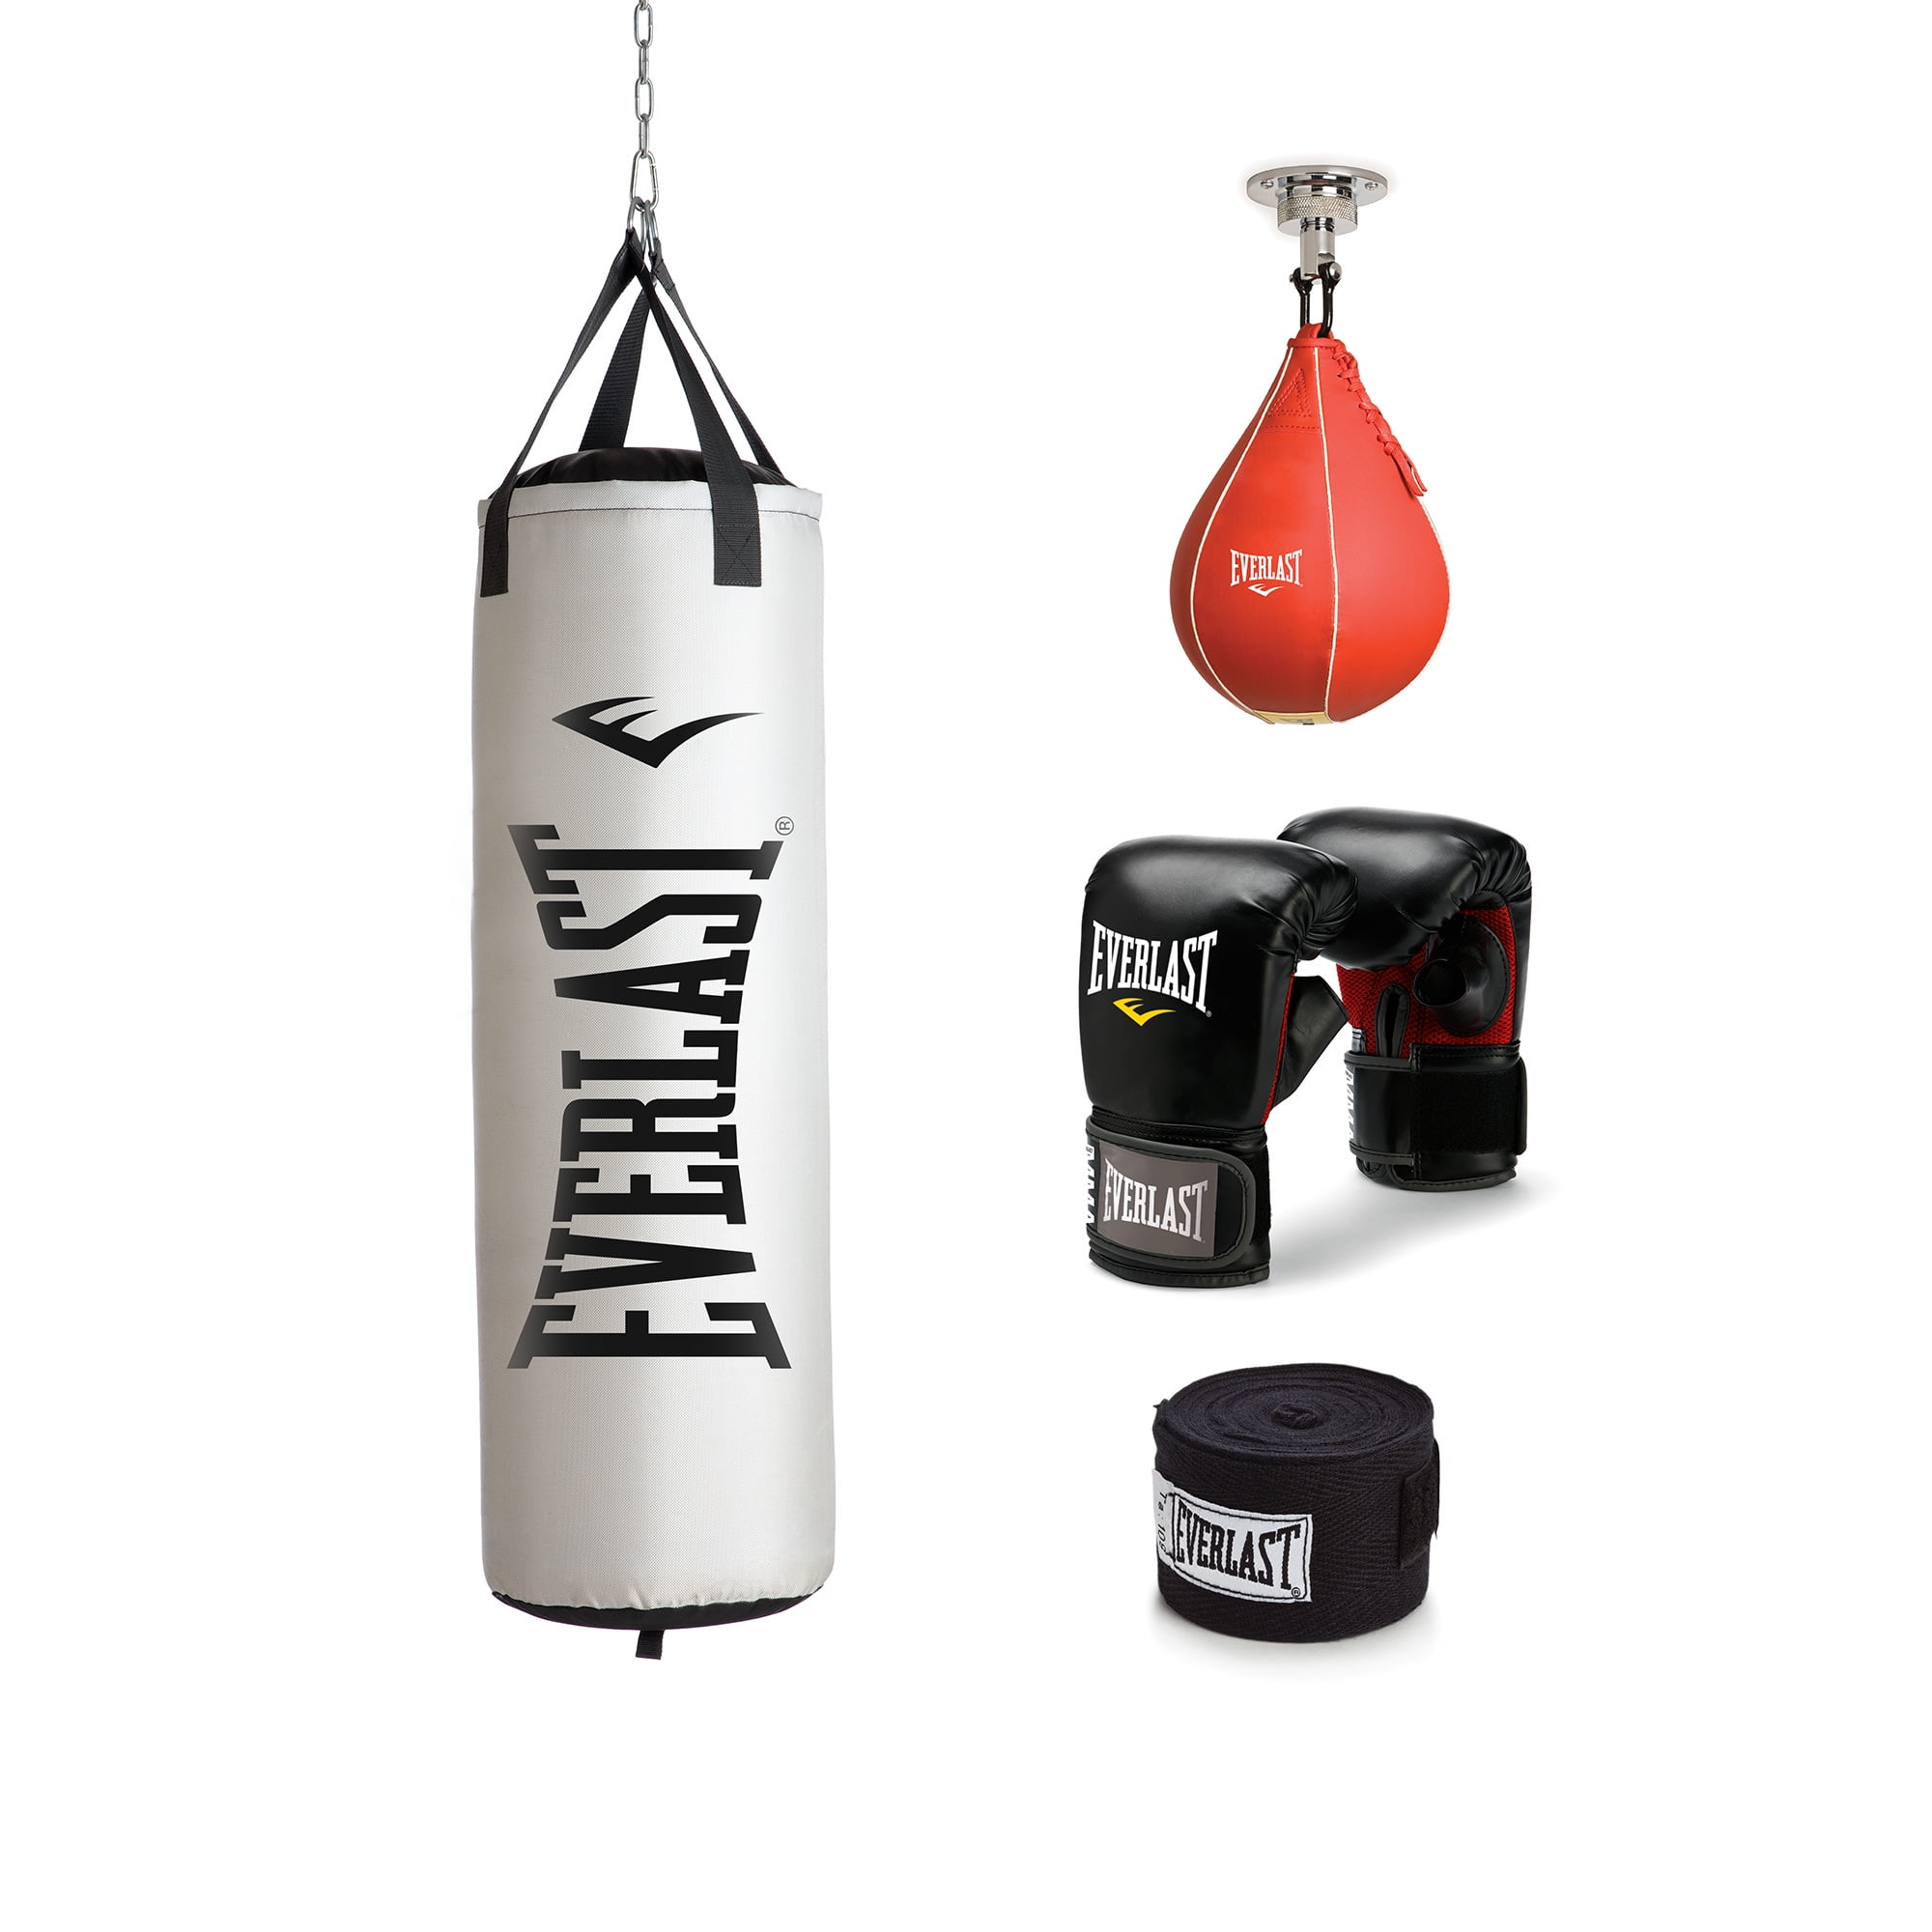 EVERLAST DUAL STATION Heavy Punching Bag Boxing Stand MMA FAST SHIP NEW! 